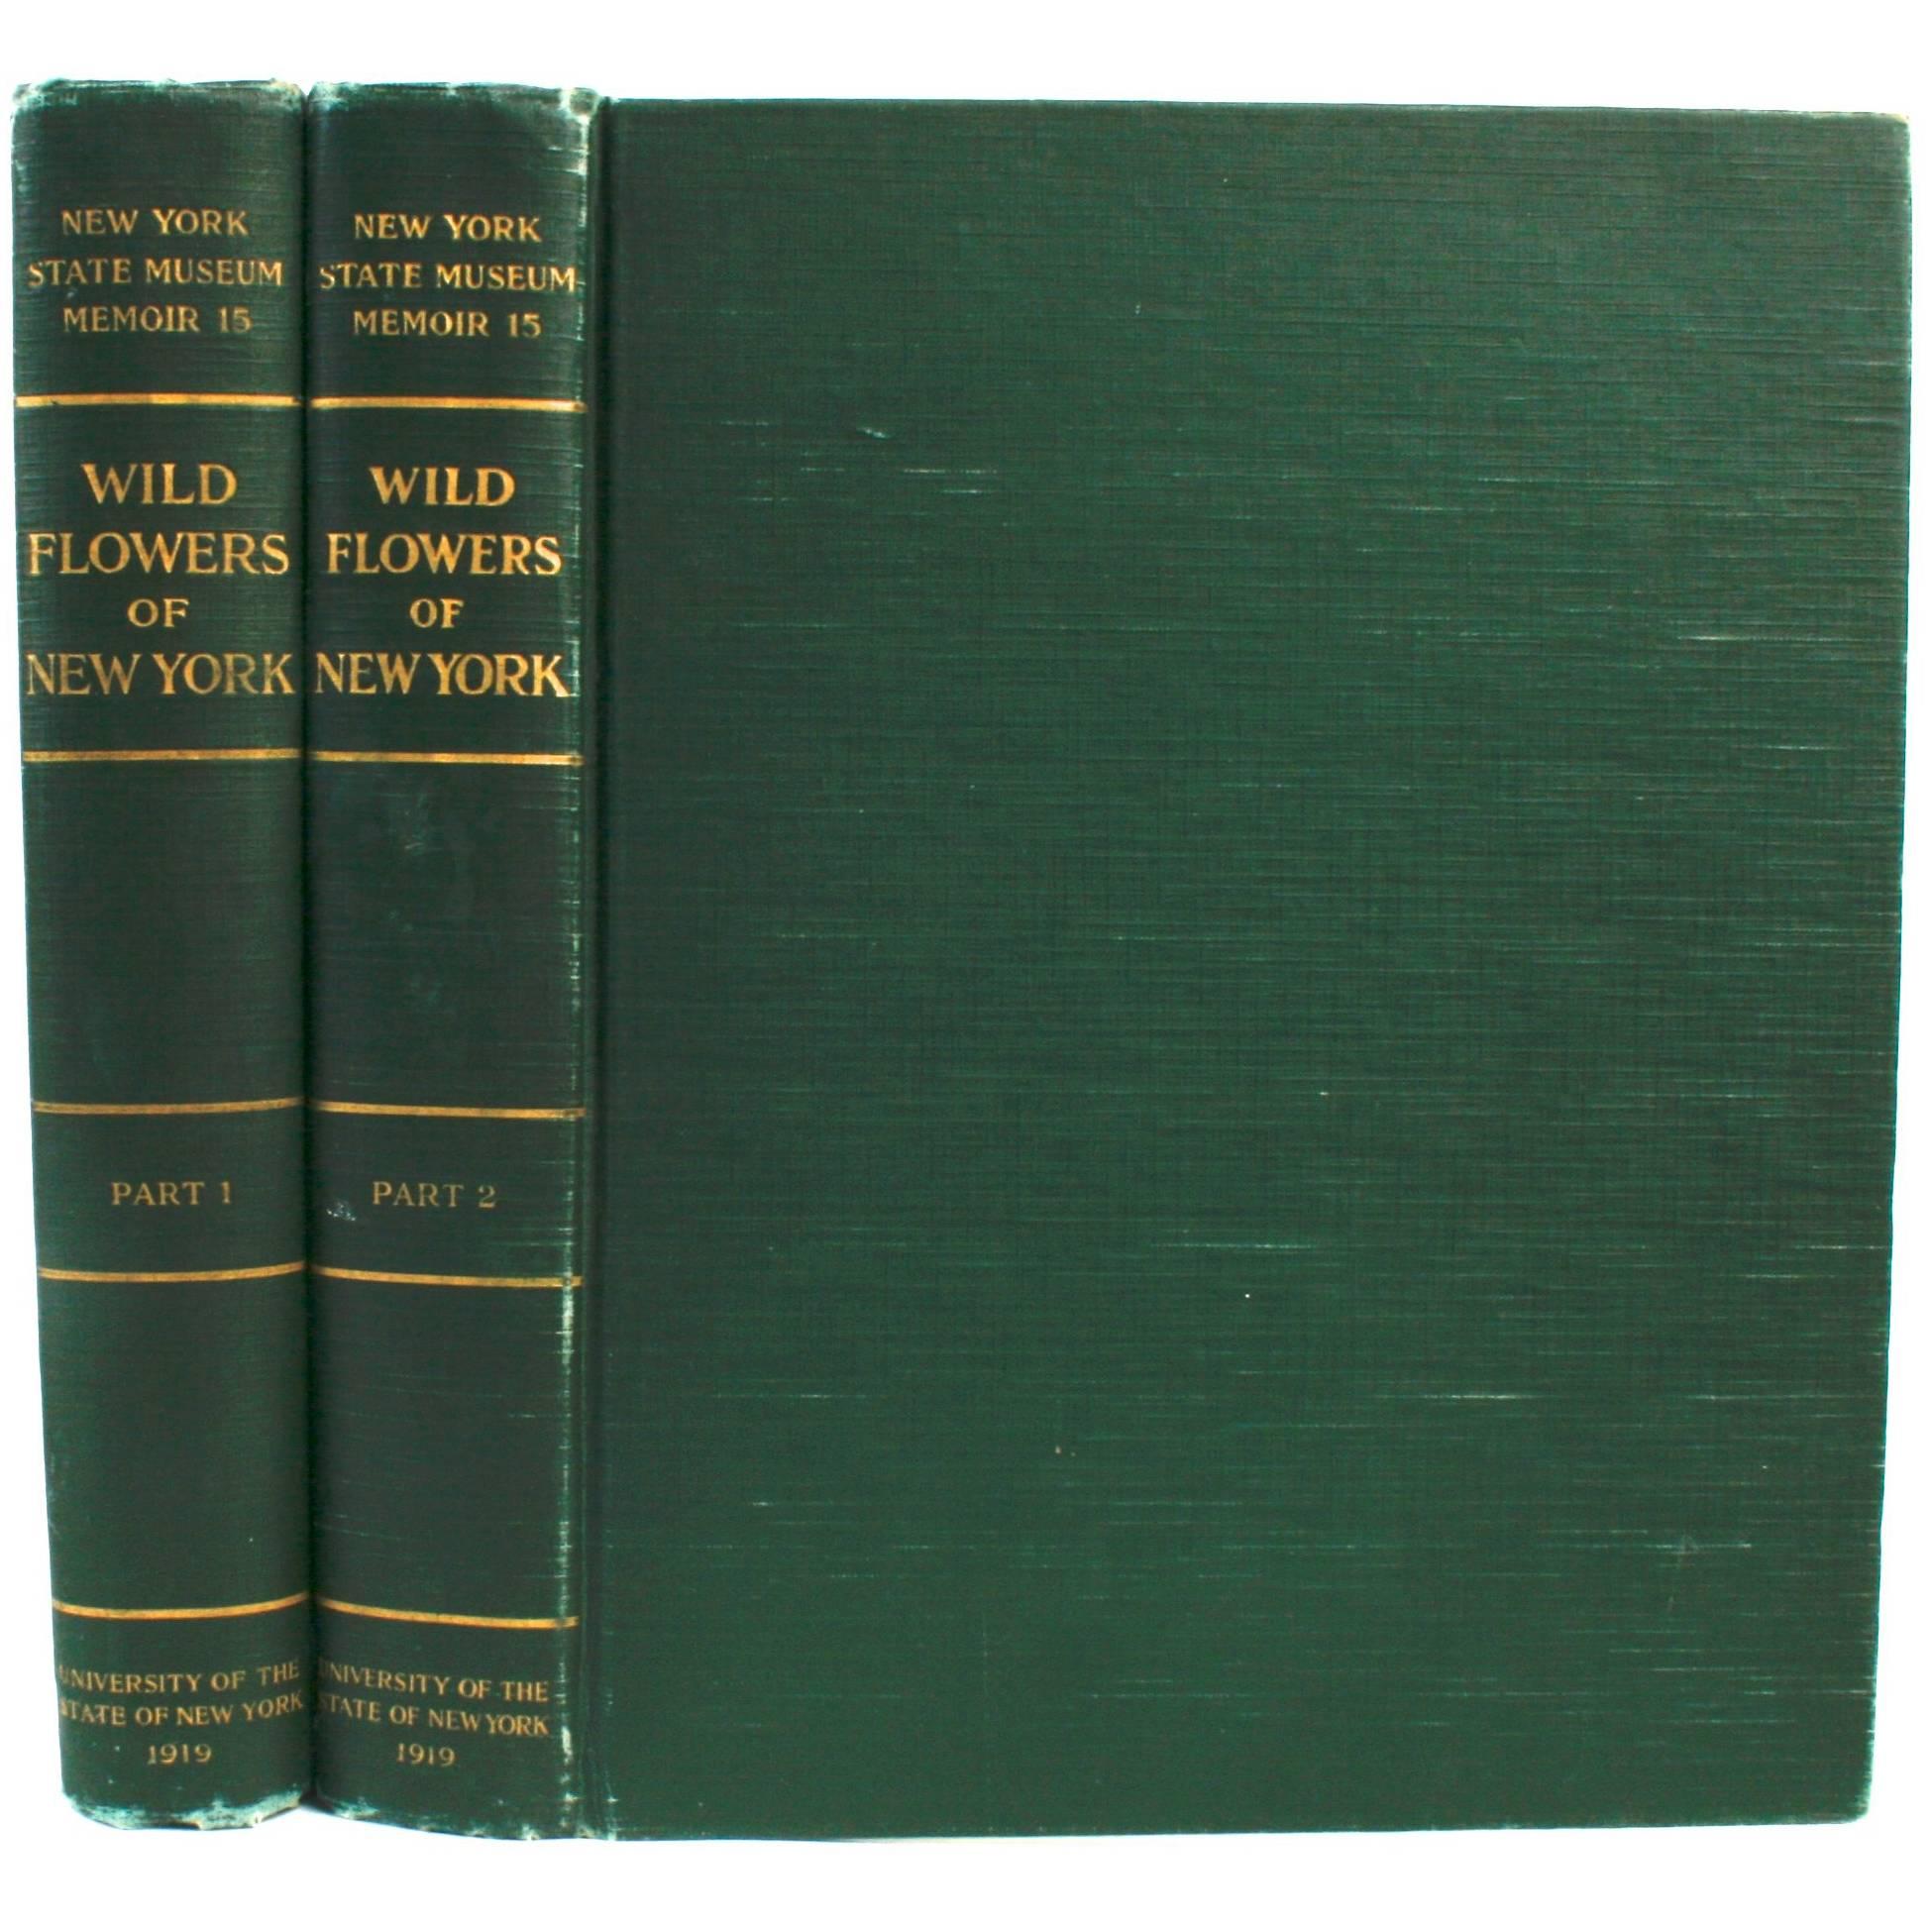 Wild Flowers of New York Vol. I and II by Homer D. House and John M. Clark